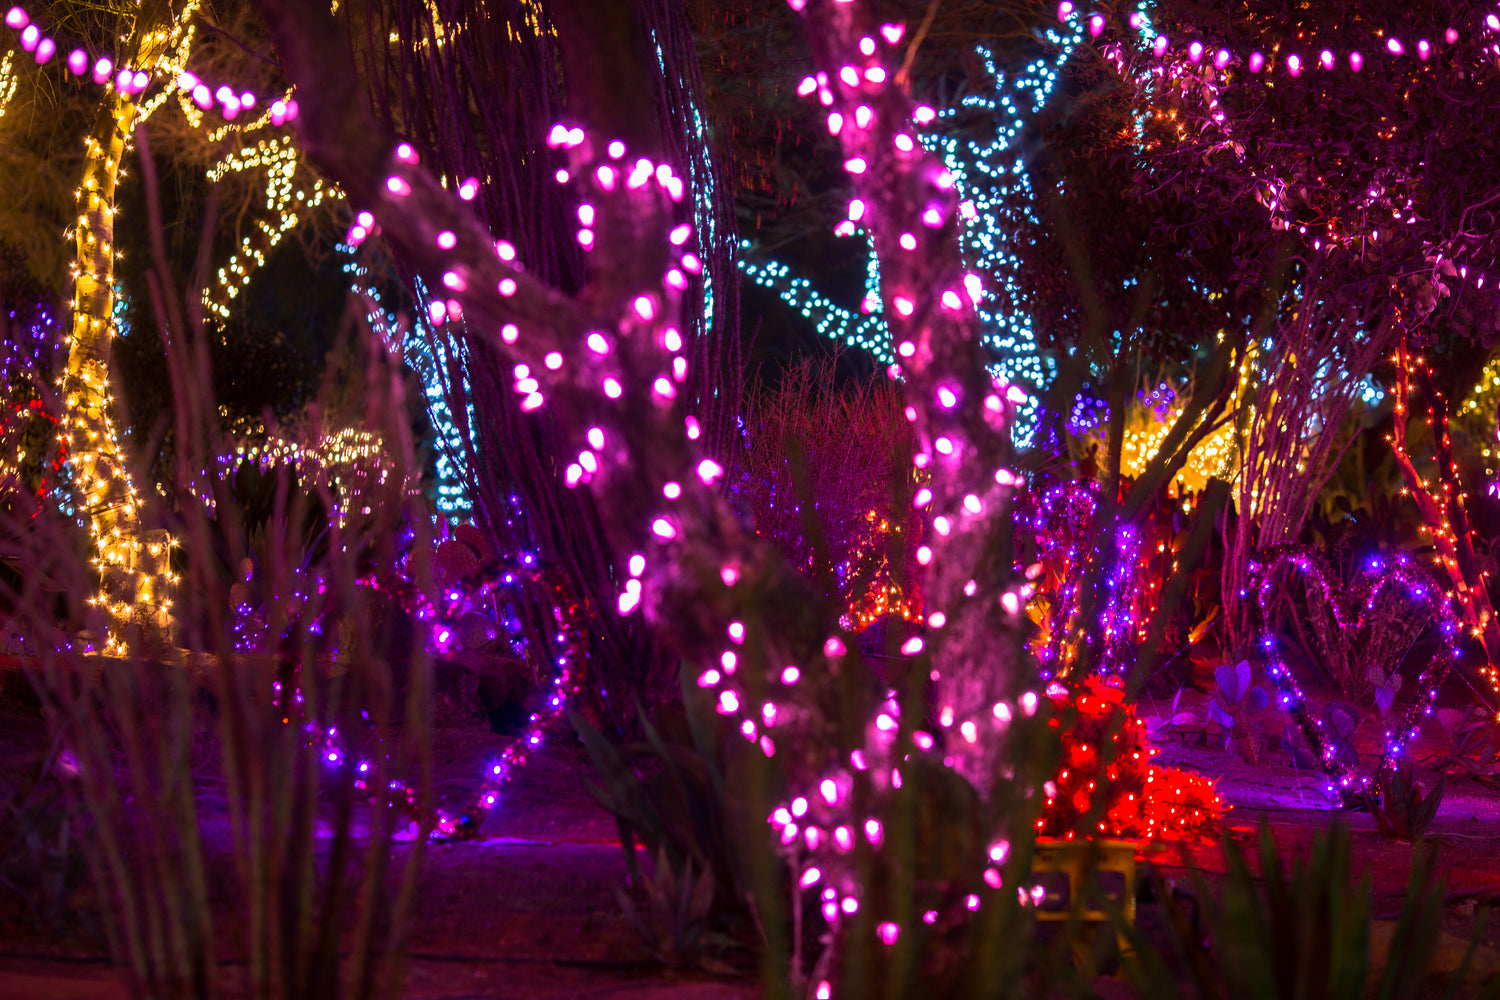 Lights of Love' opens at Ethel M cactus garden ahead of Valentine's Day